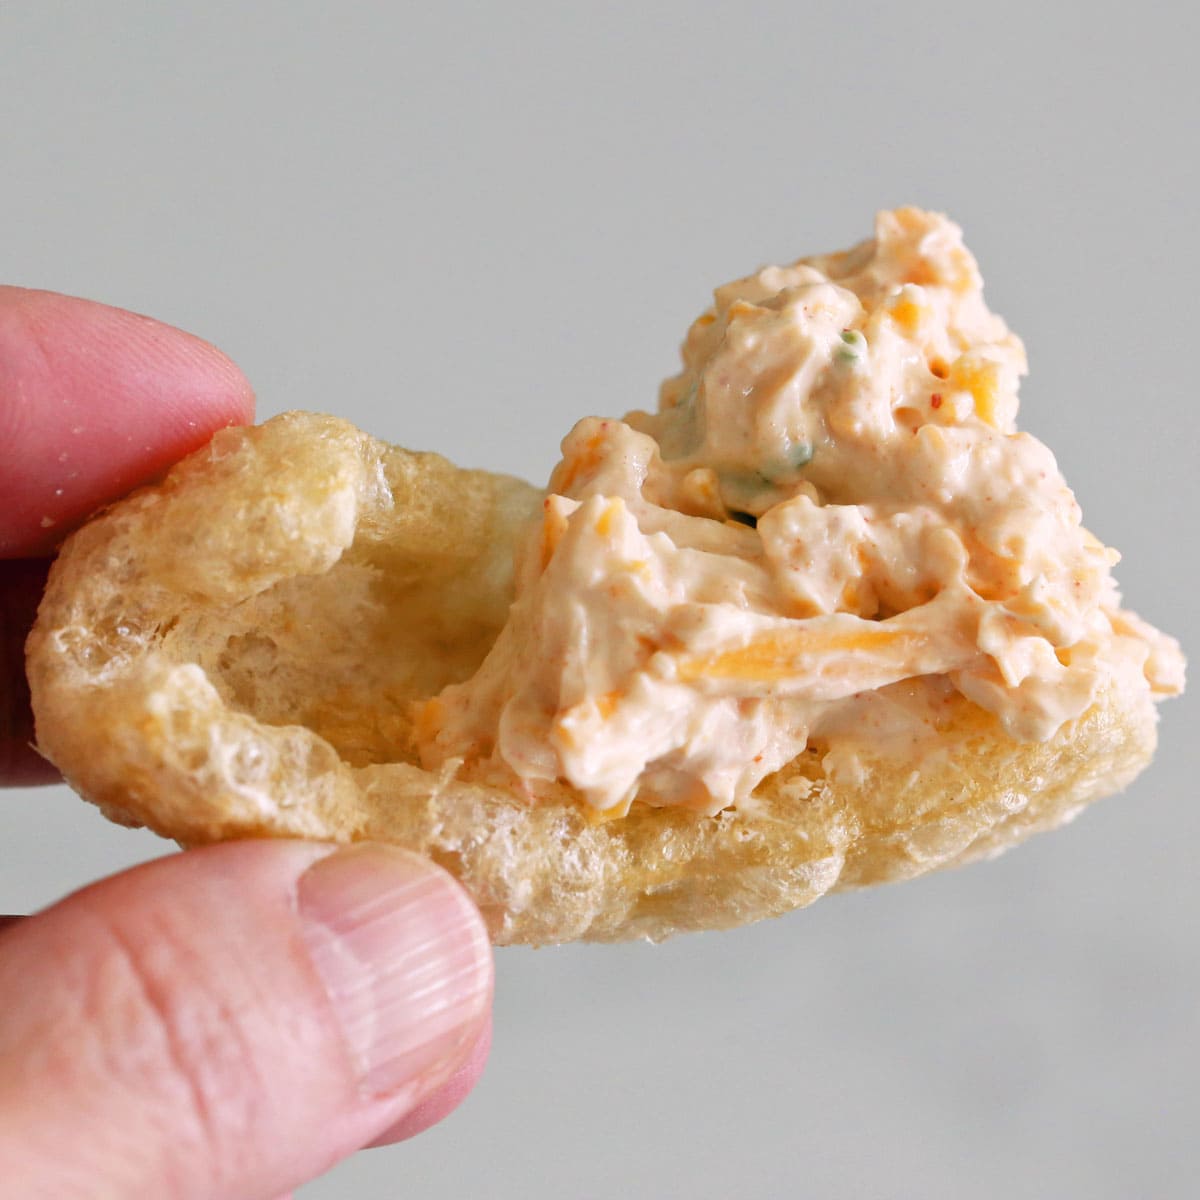 Scooping cream cheese dip with pork rinds.